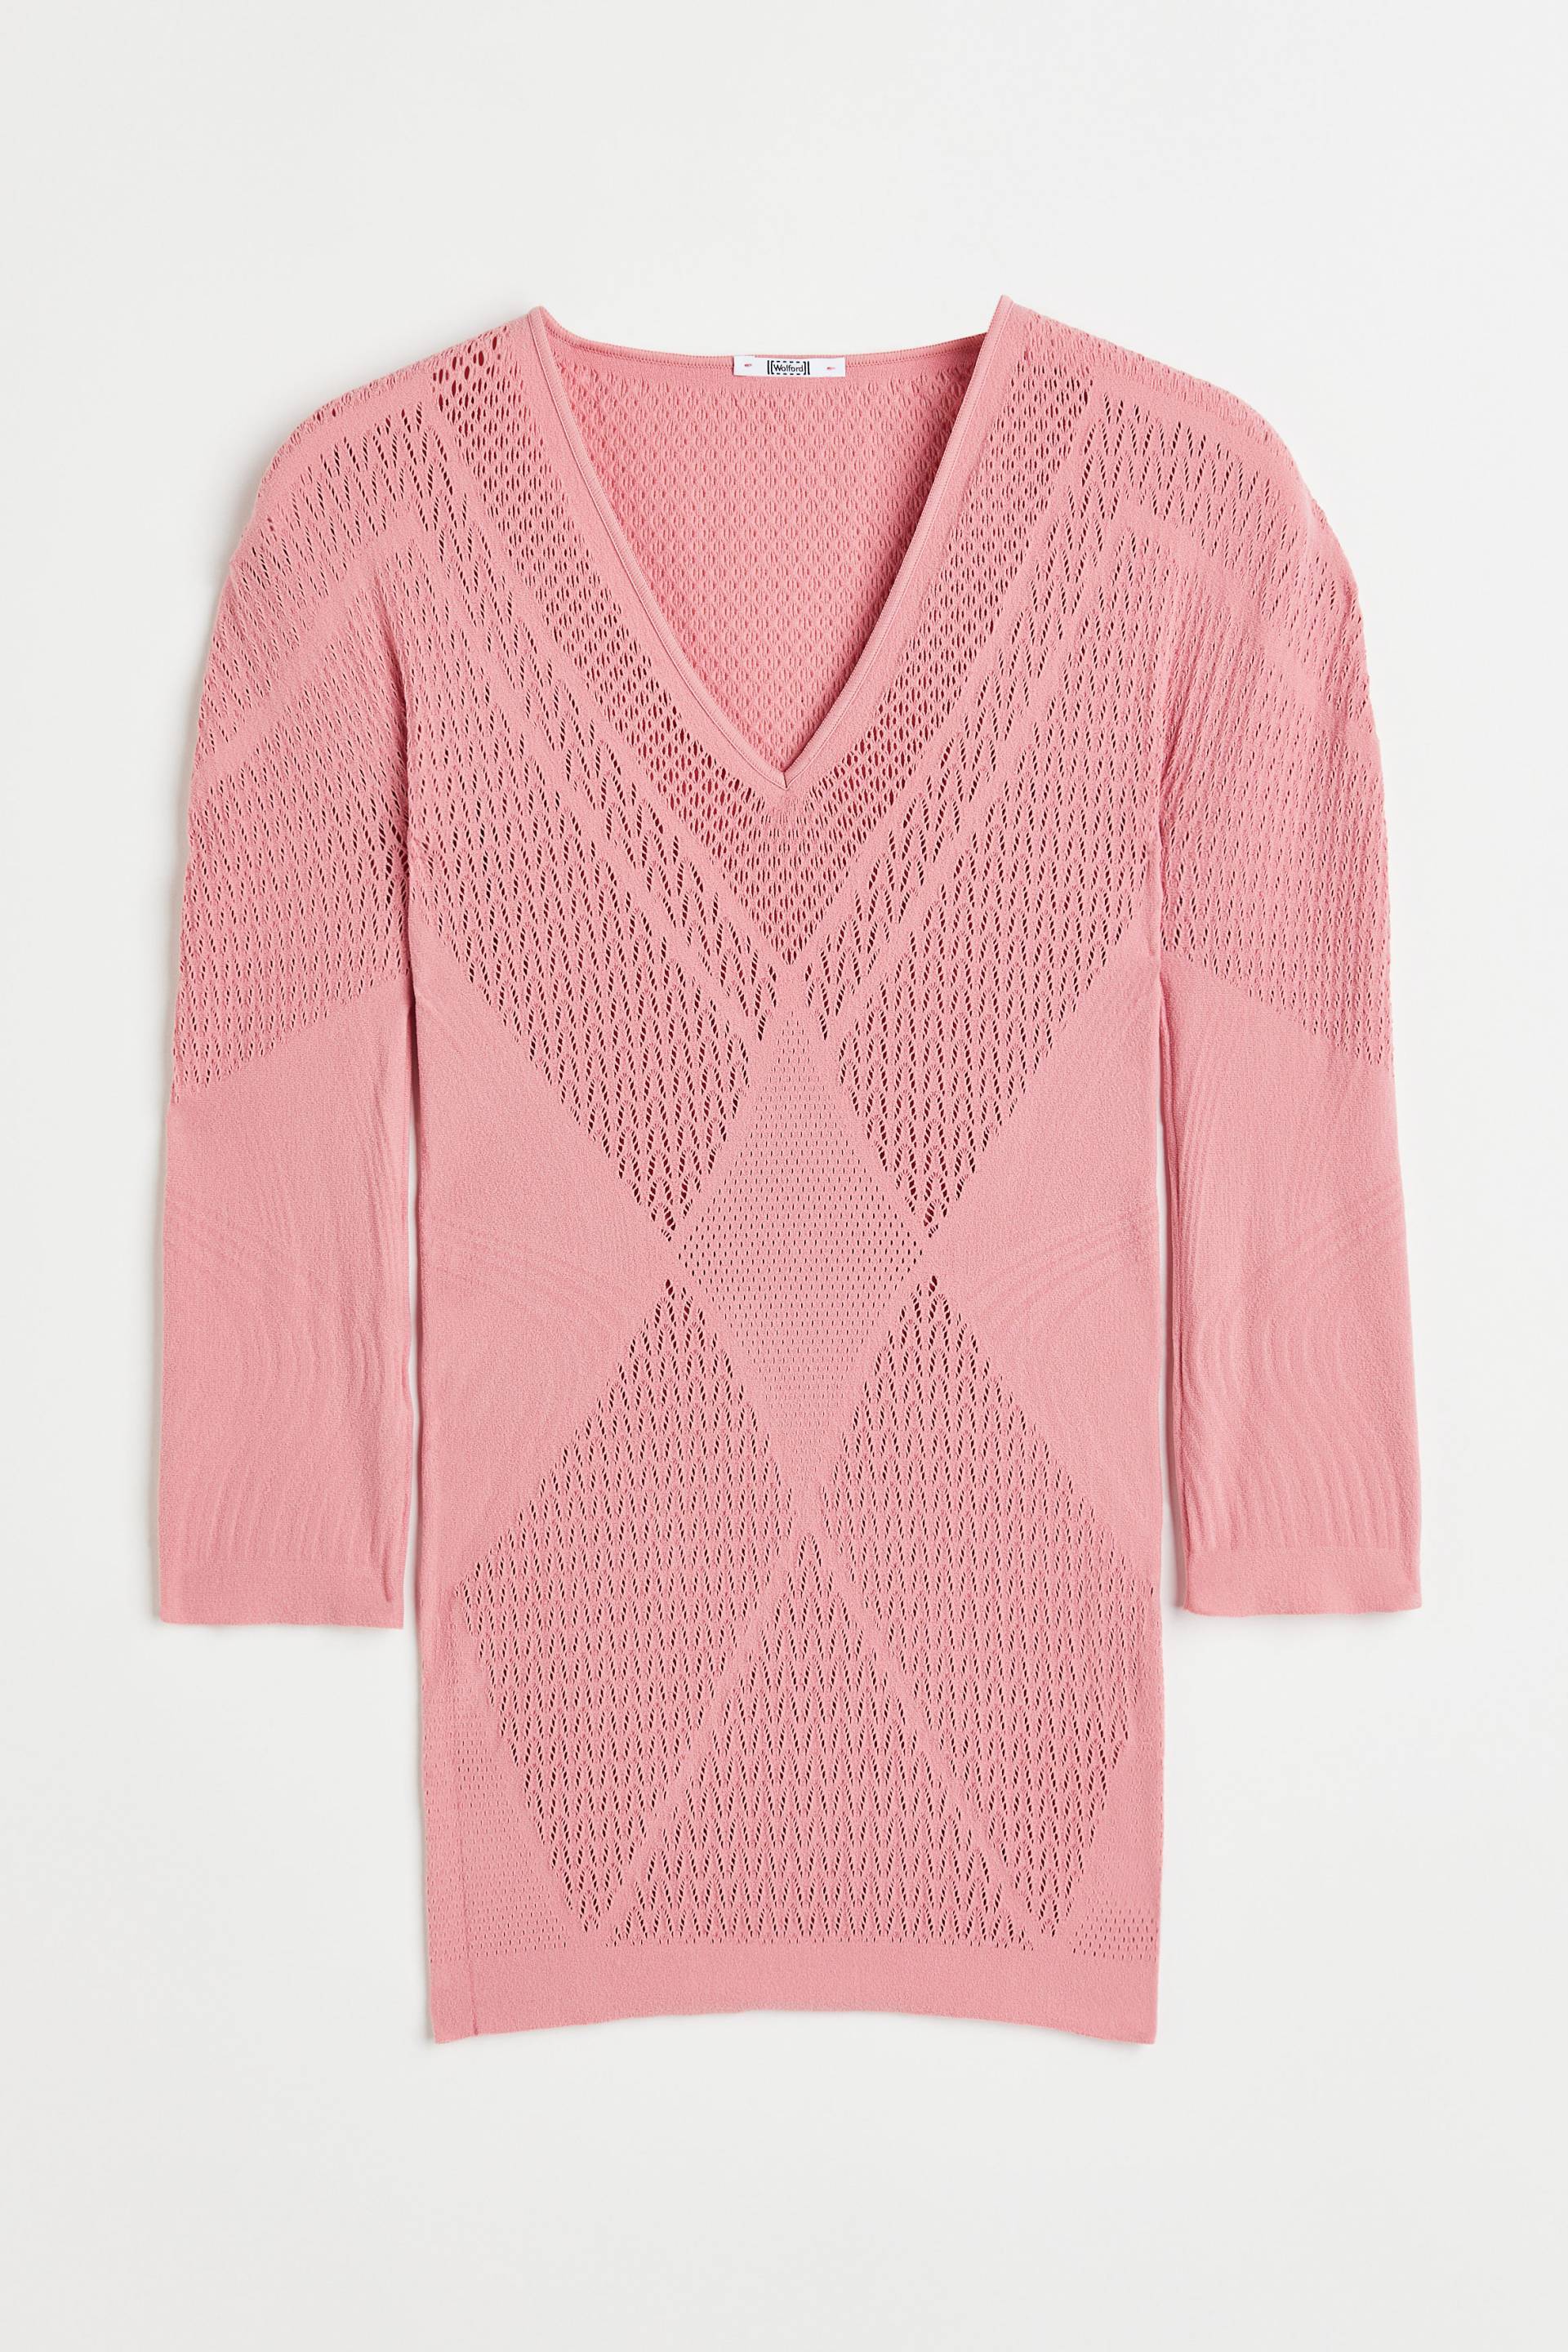 Wolford Romance Net Top Long Sleeves Pink, Tops in Größe L von Wolford